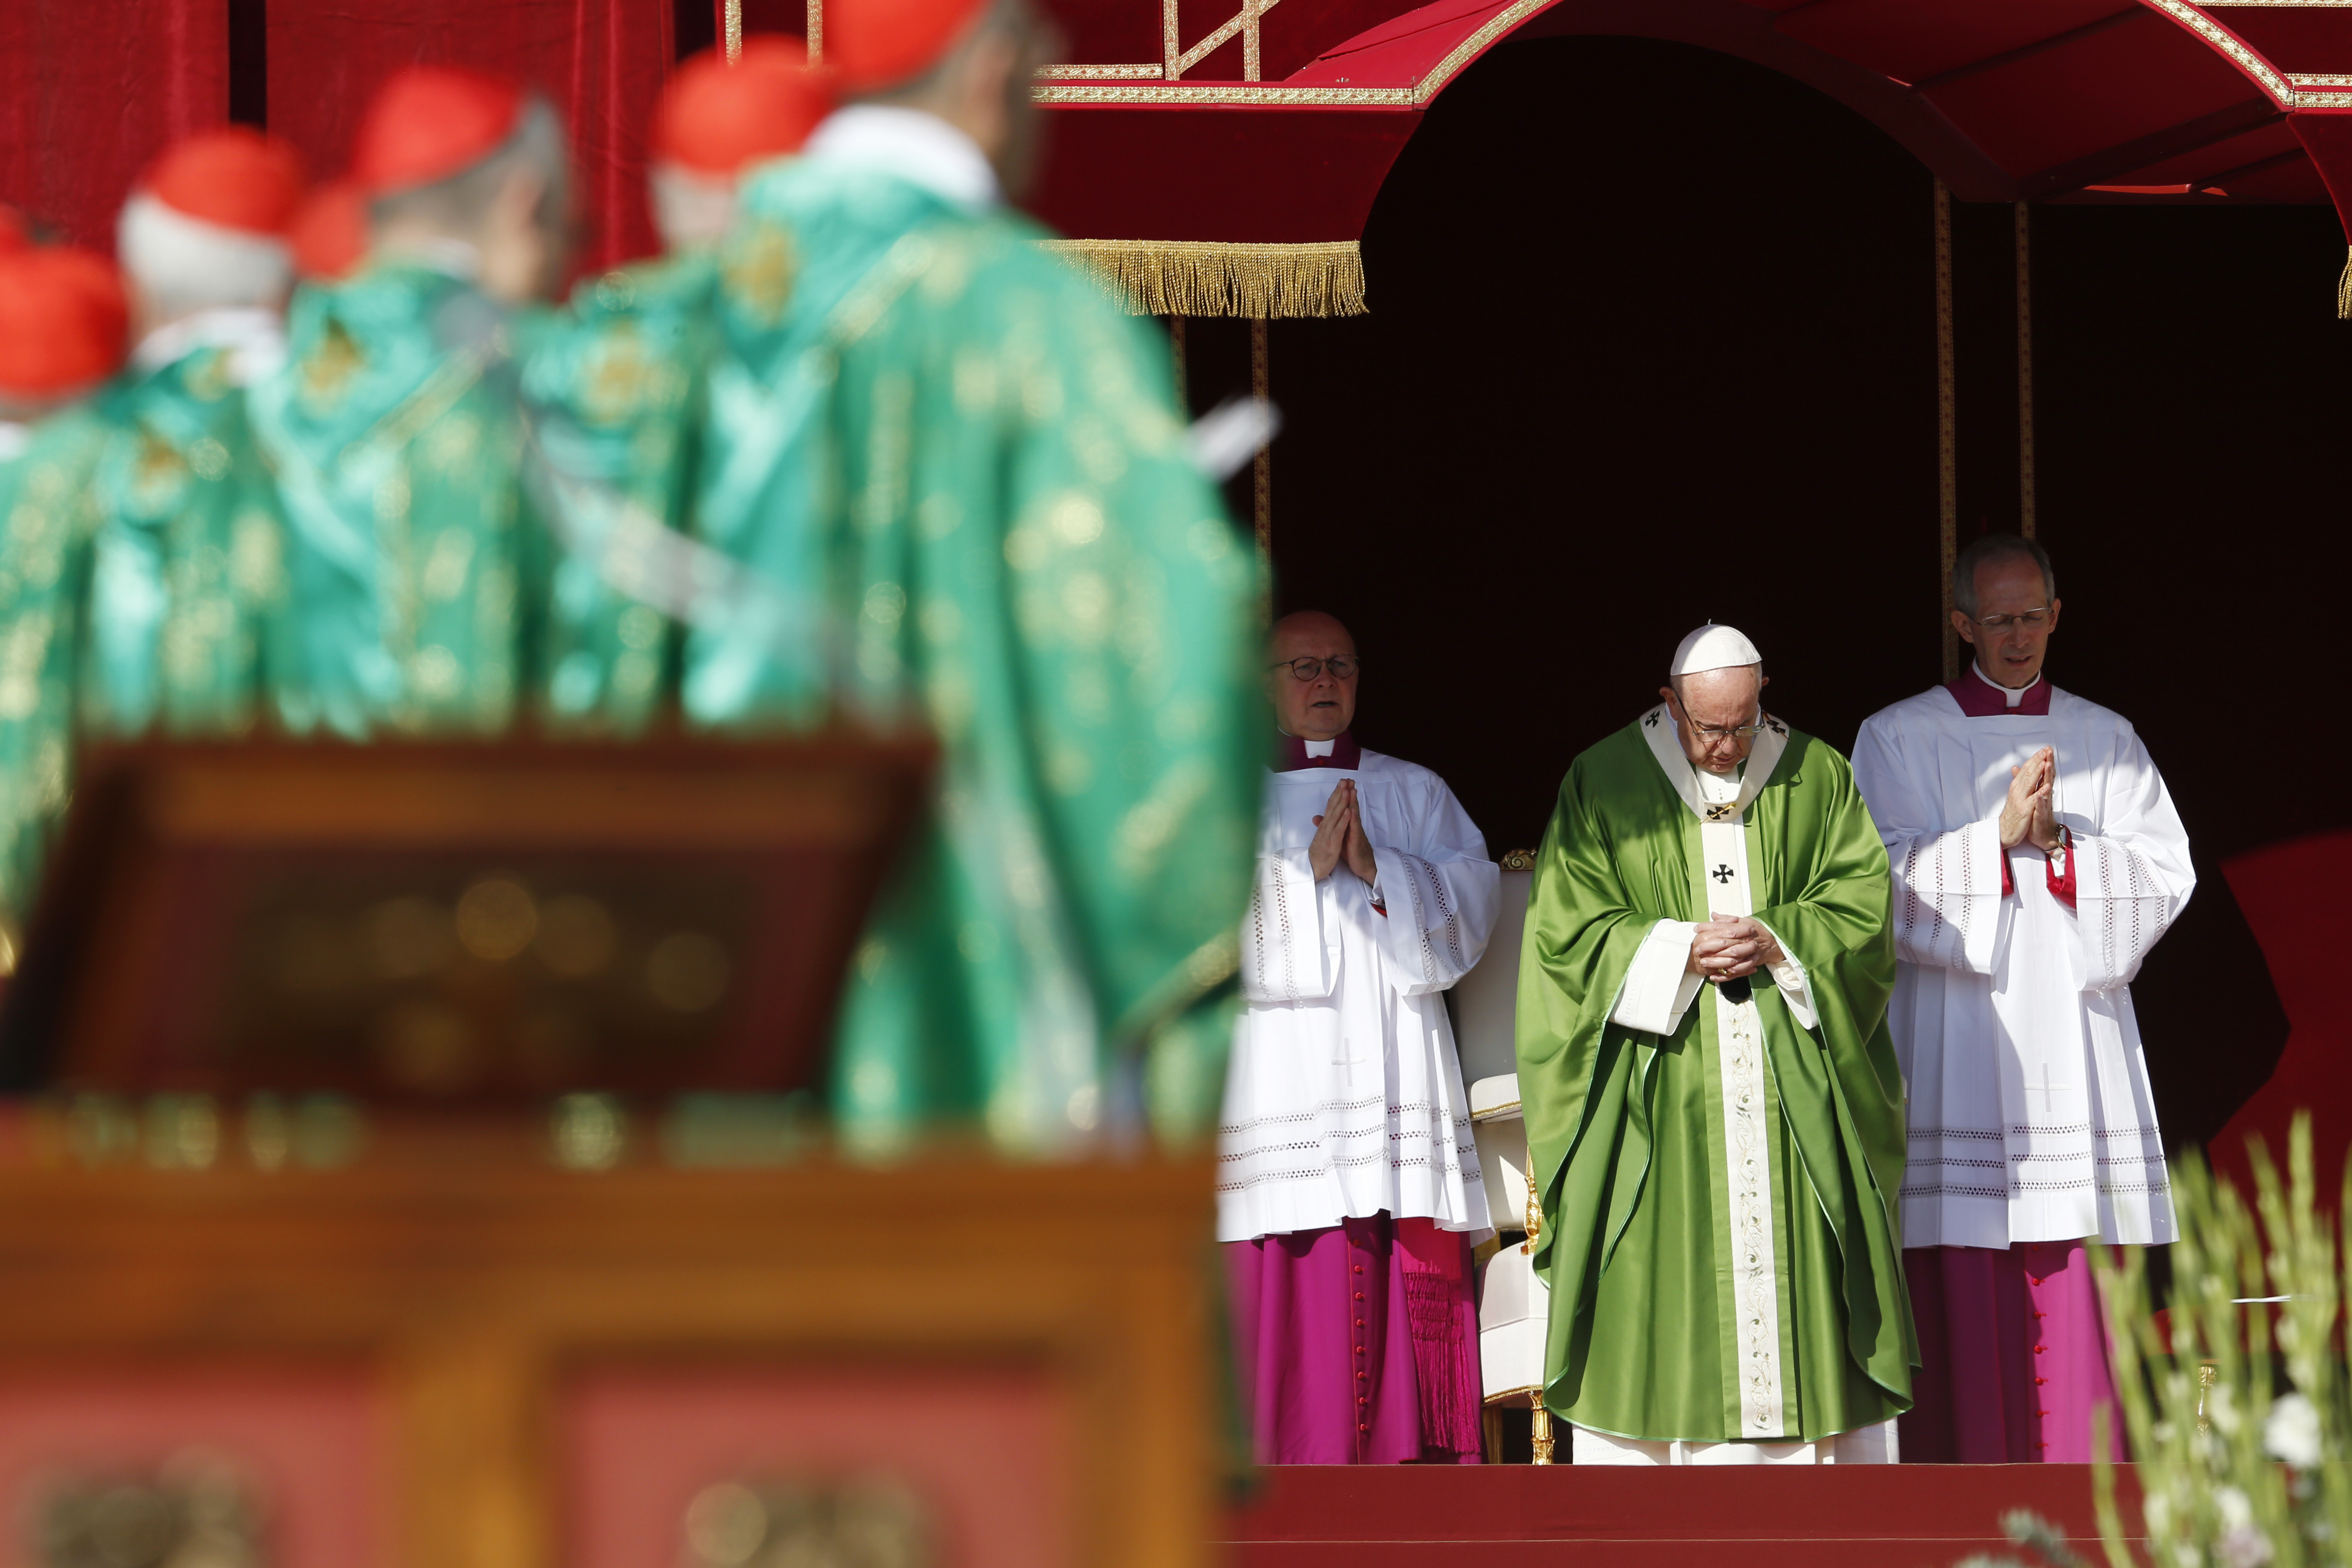 Learn from young to avoid 'moralistic or elitist postures', Pope tells synod 